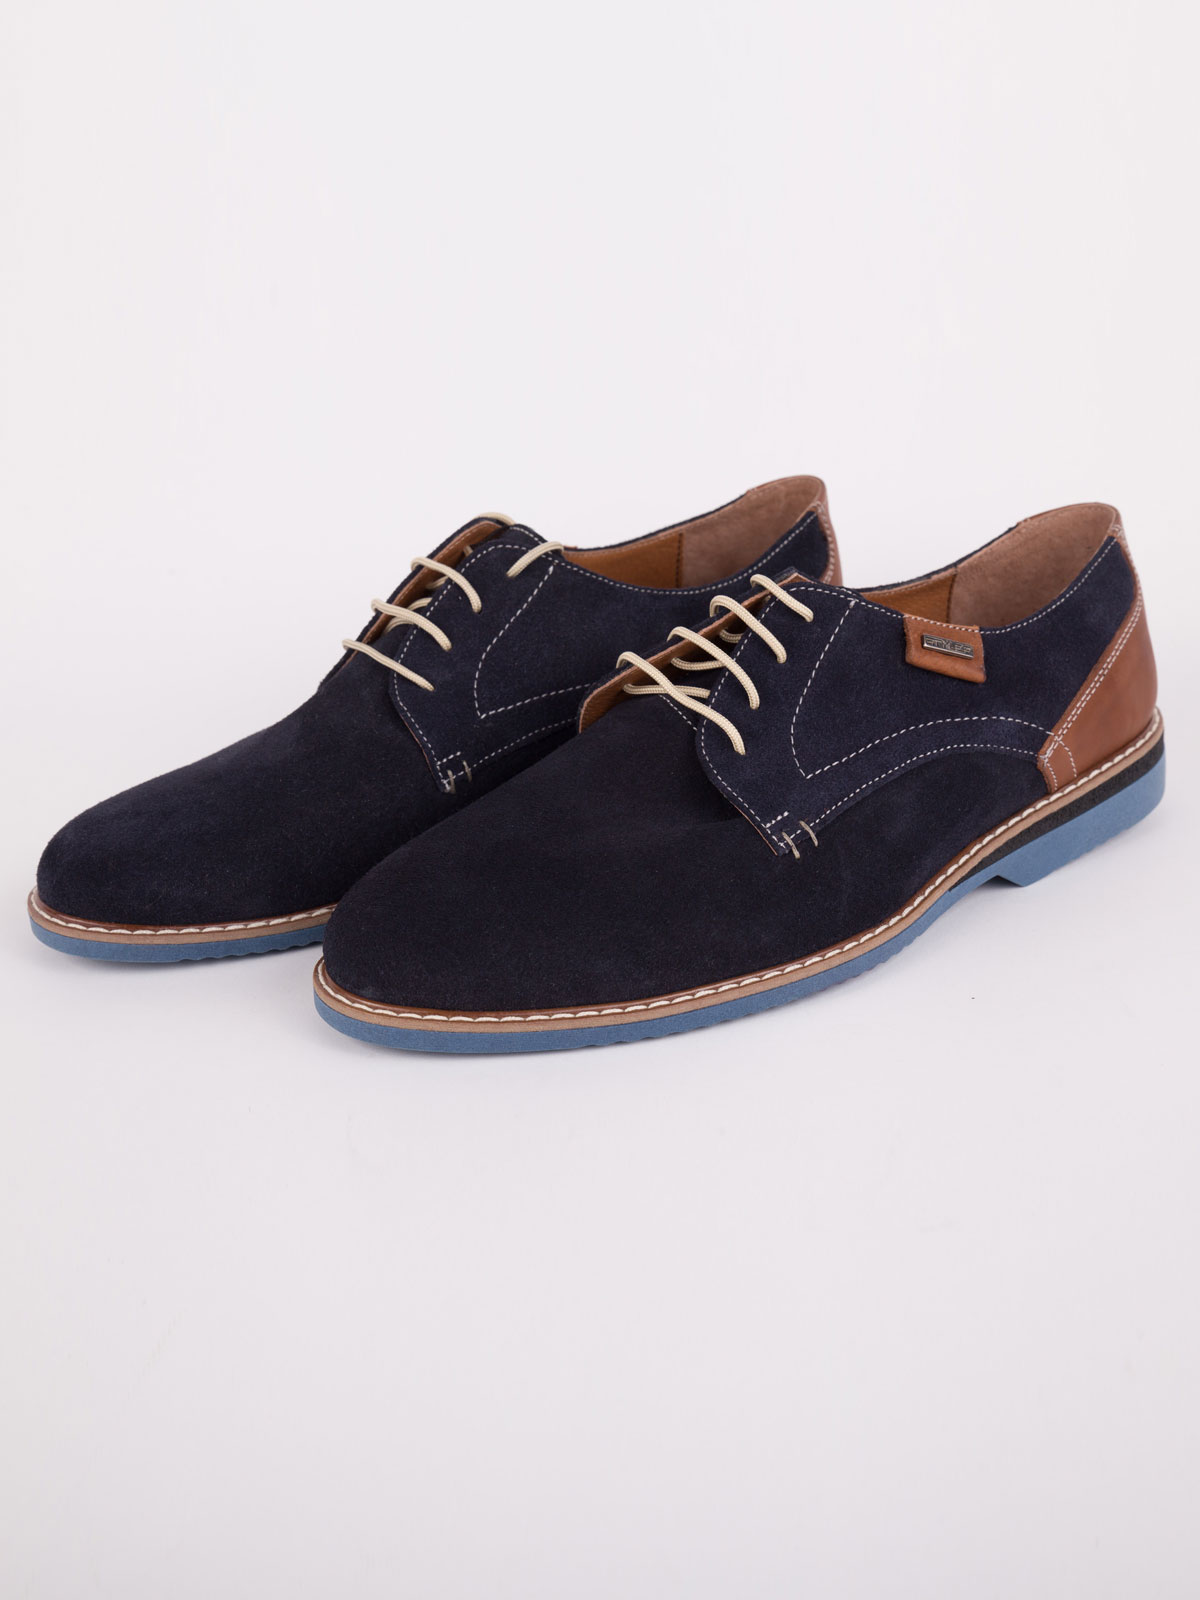 Mens suede and leather shoes - 81078 - € 83.24 img3